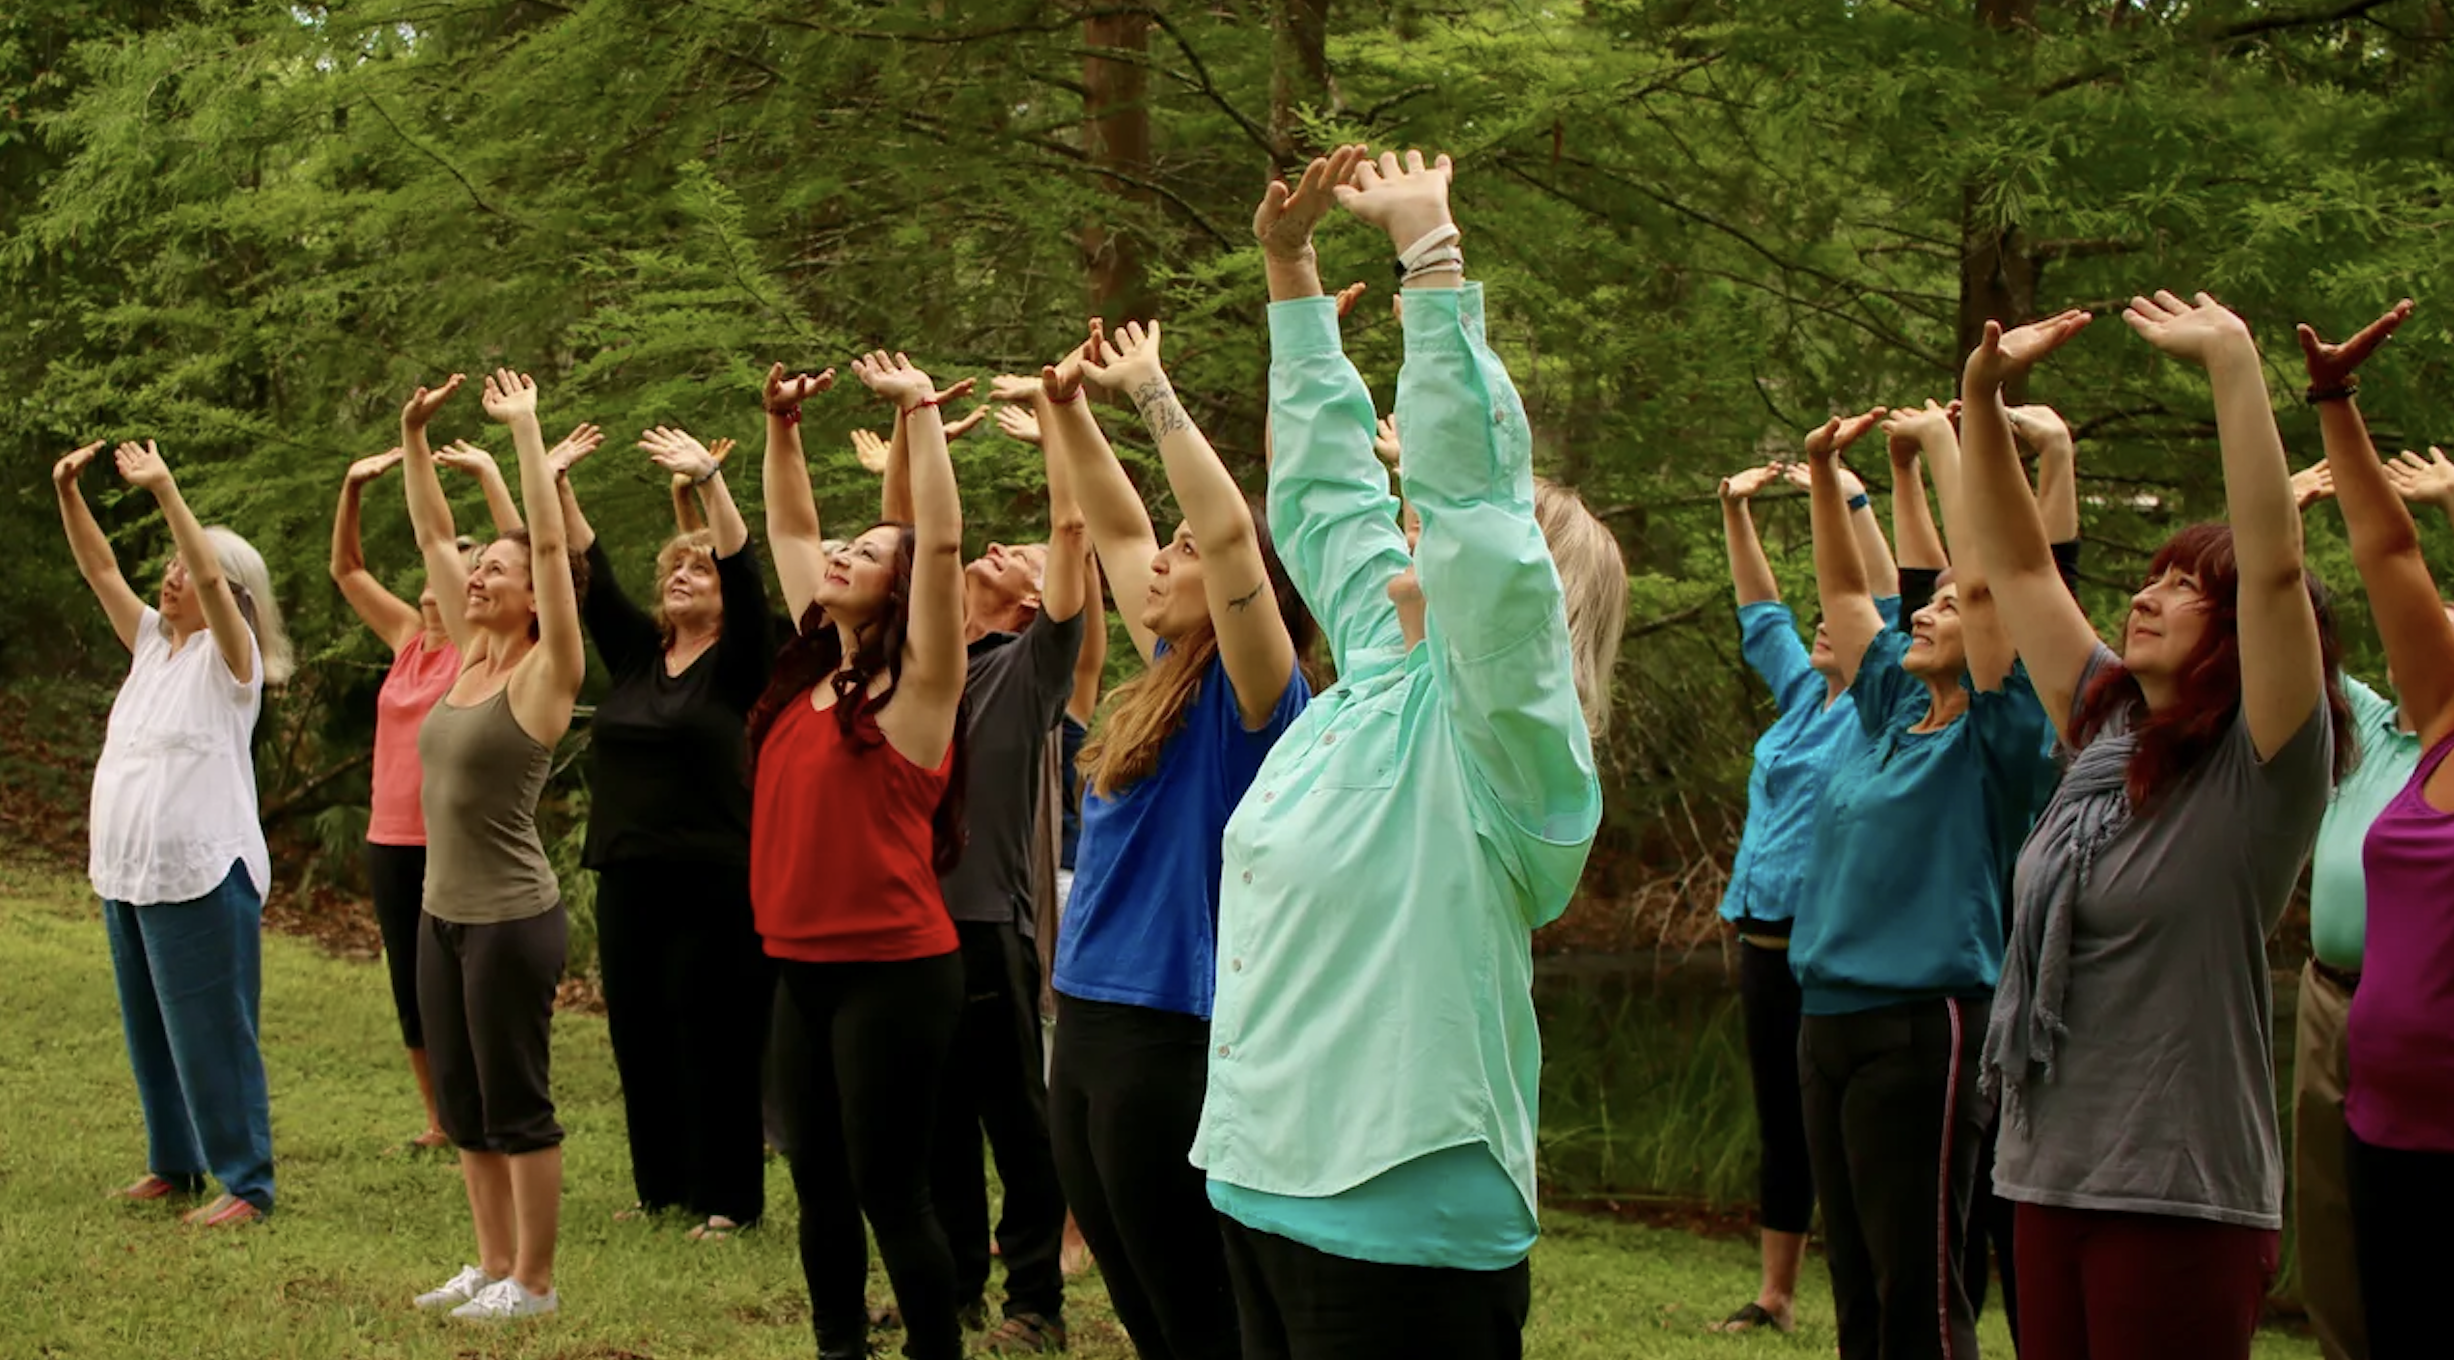 A group of people practicing Qigong in a park.